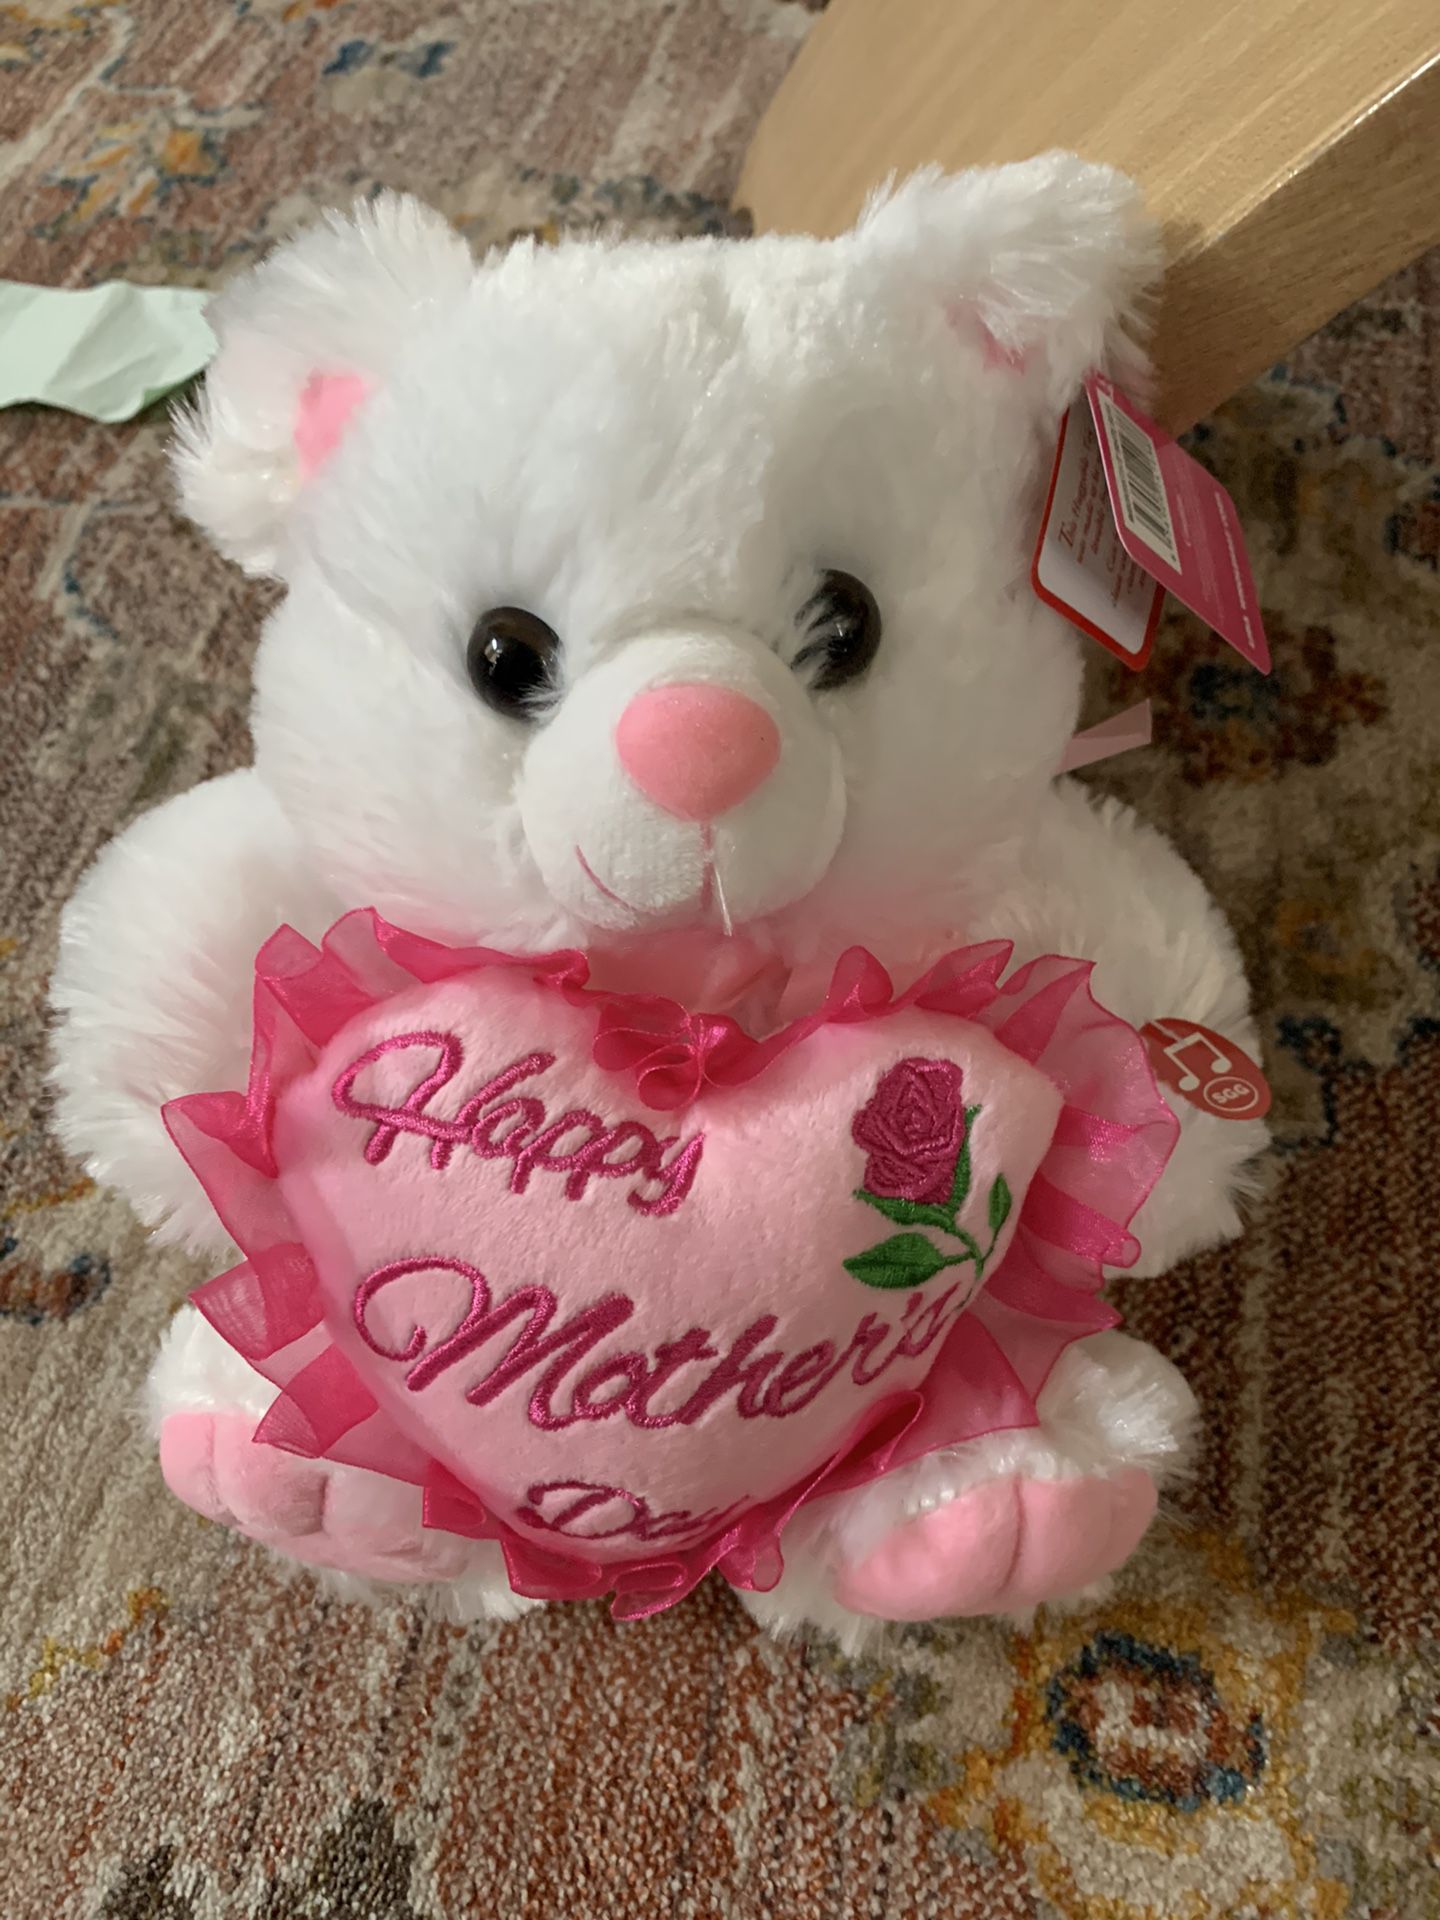 NEW 9 Inch Mothers Day Teddy Bear WITH AUDIO